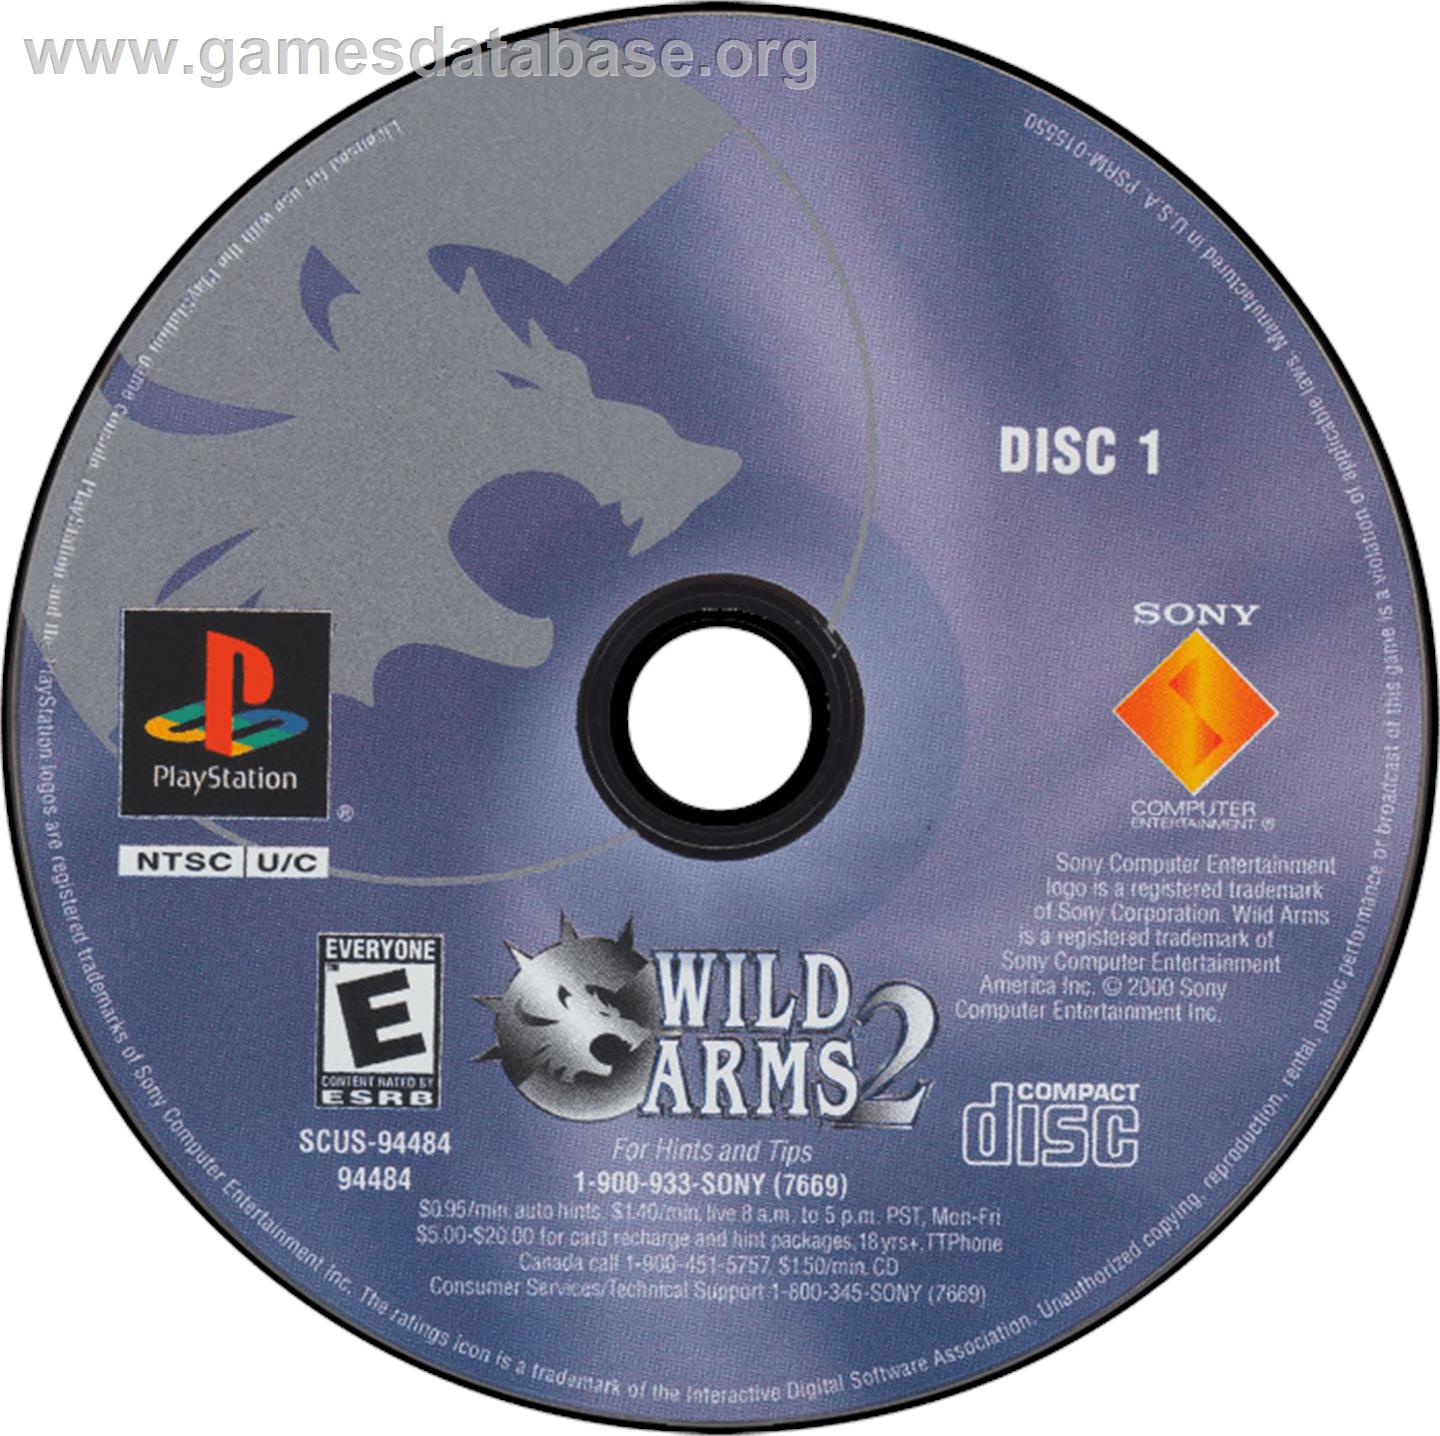 Wild Arms 2 - Sony Playstation - Artwork - Disc